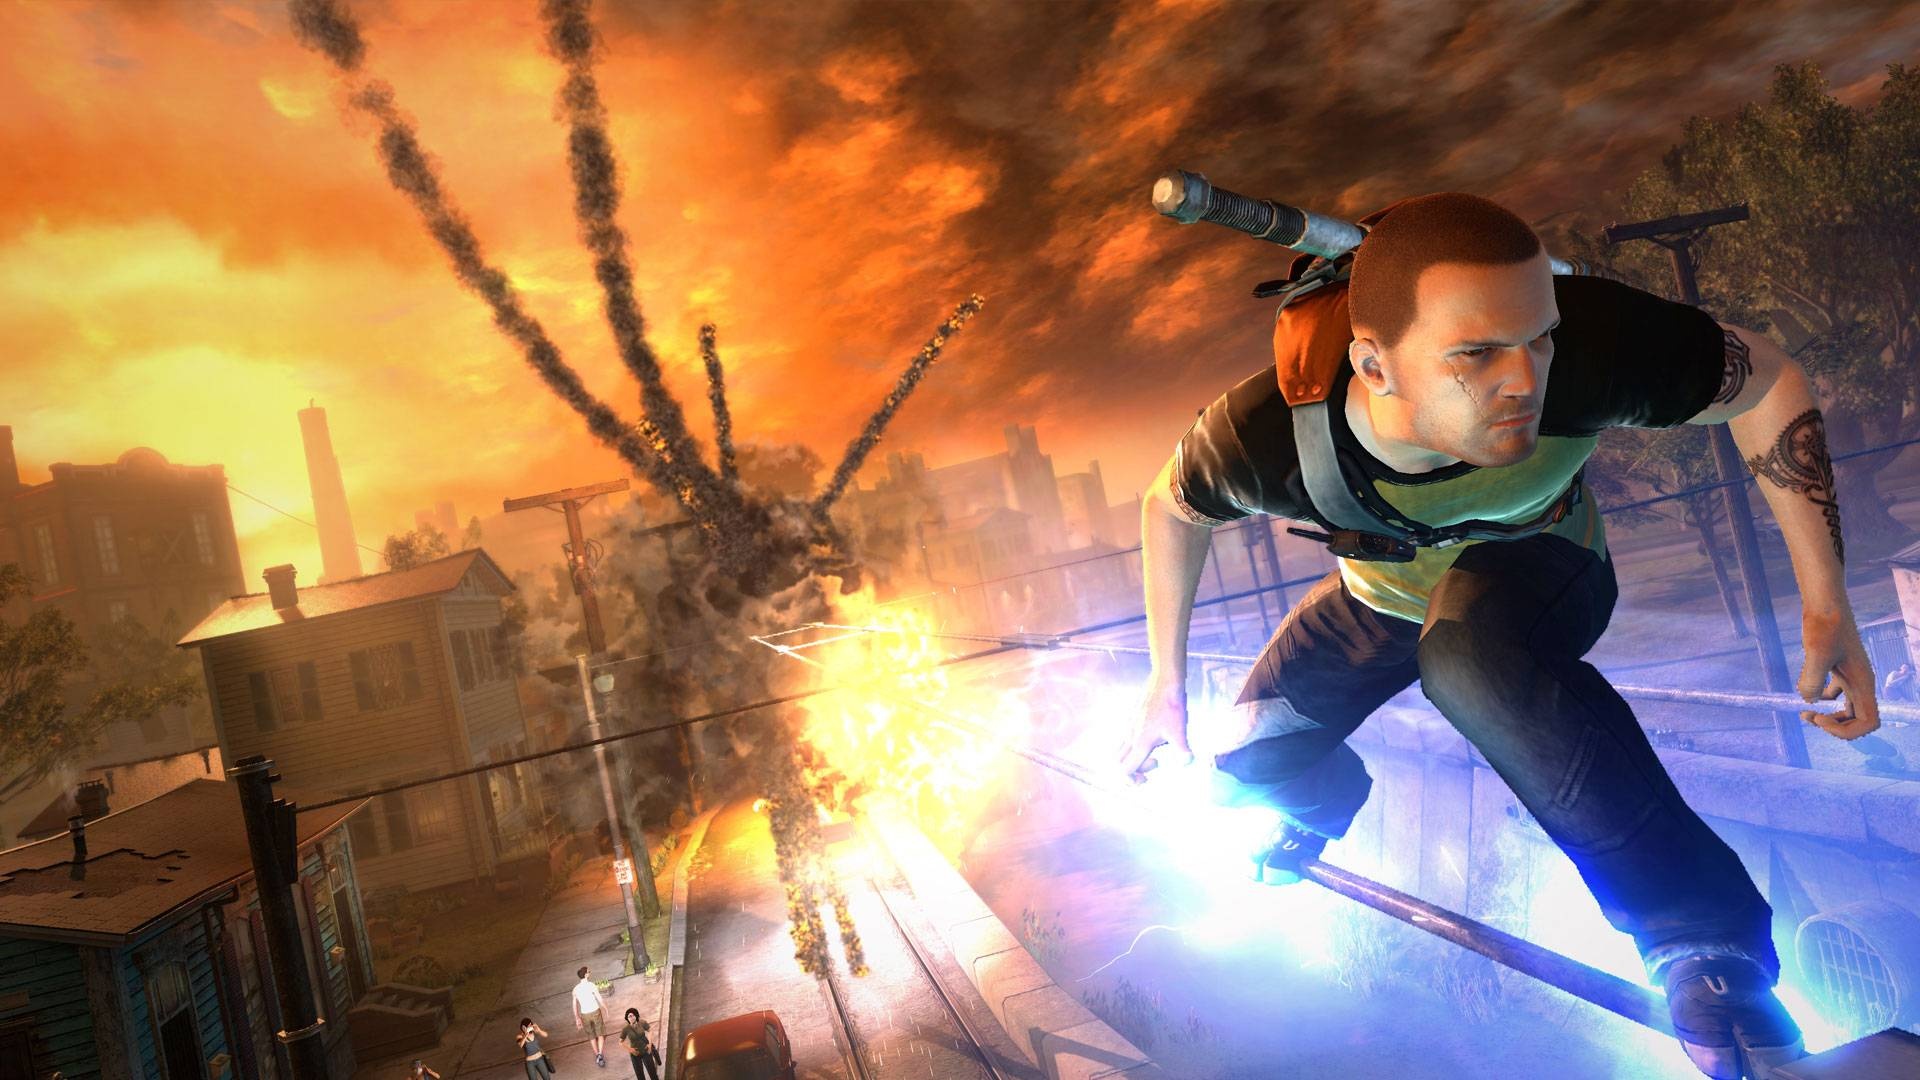 inFAMOUS 2, Full HD wallpapers, Superpowered action, Epic gaming moments, 1920x1080 Full HD Desktop